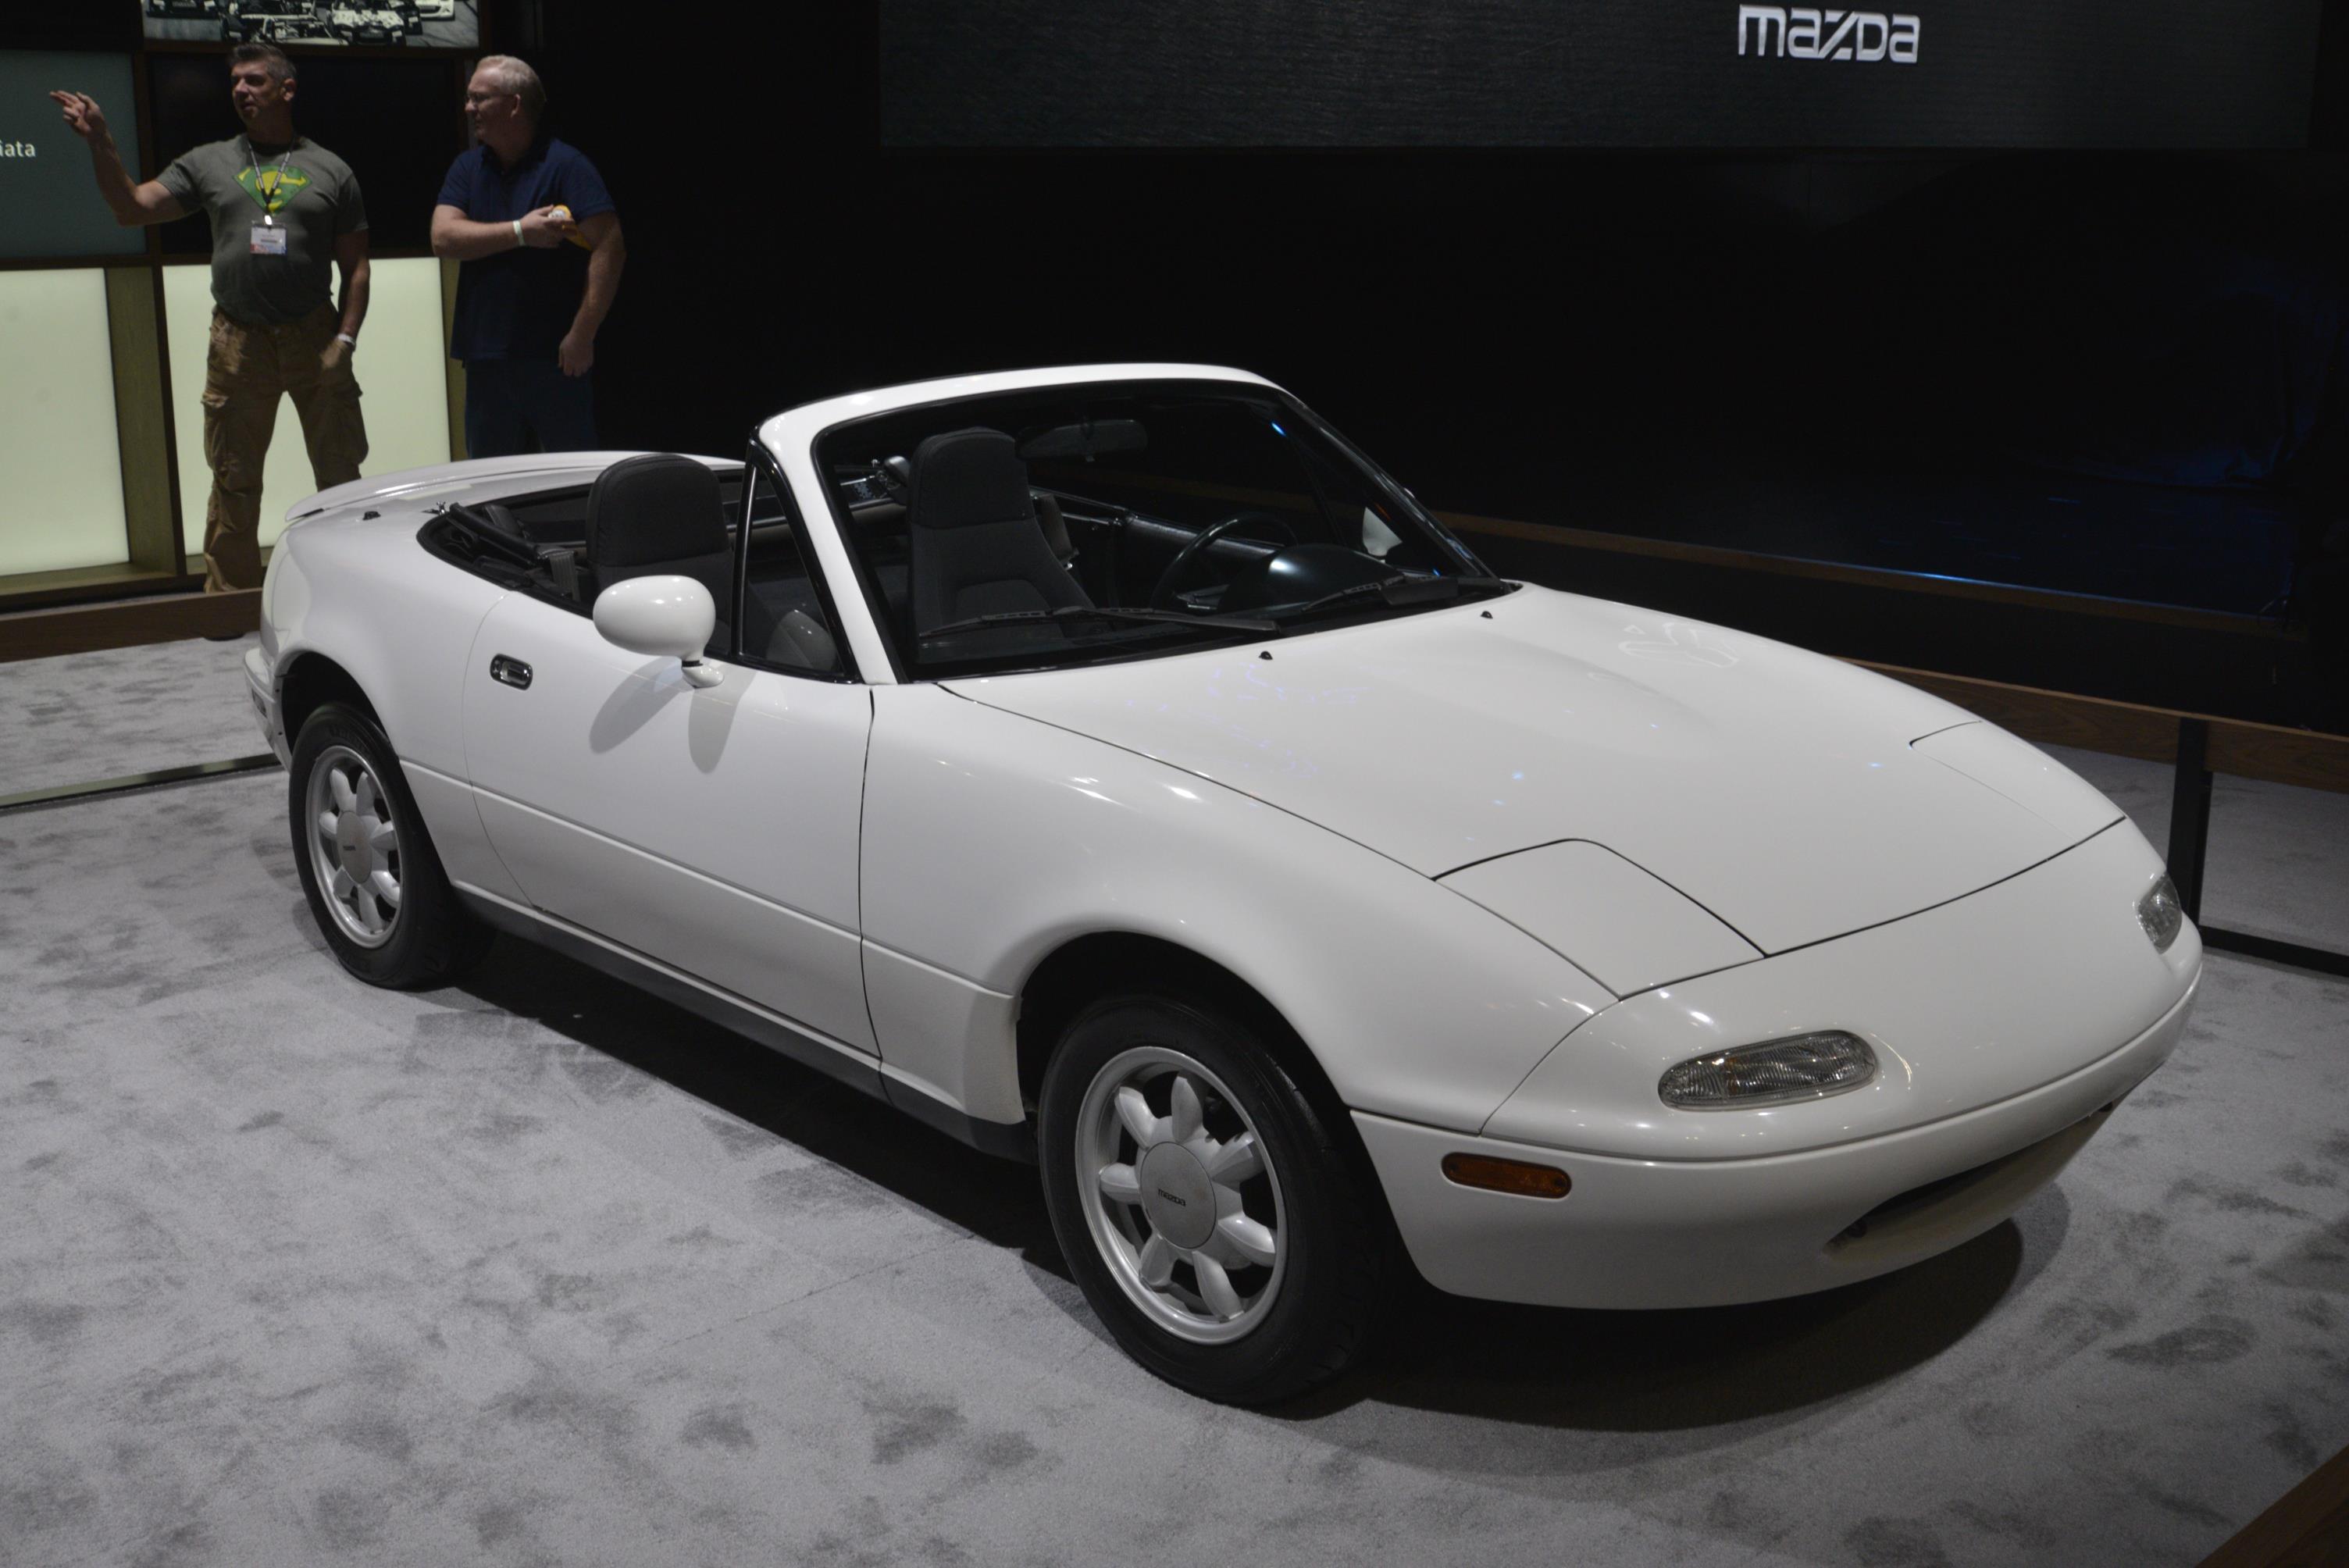 The MX-5 has gone on to be one of the most iconic roadsters of all time